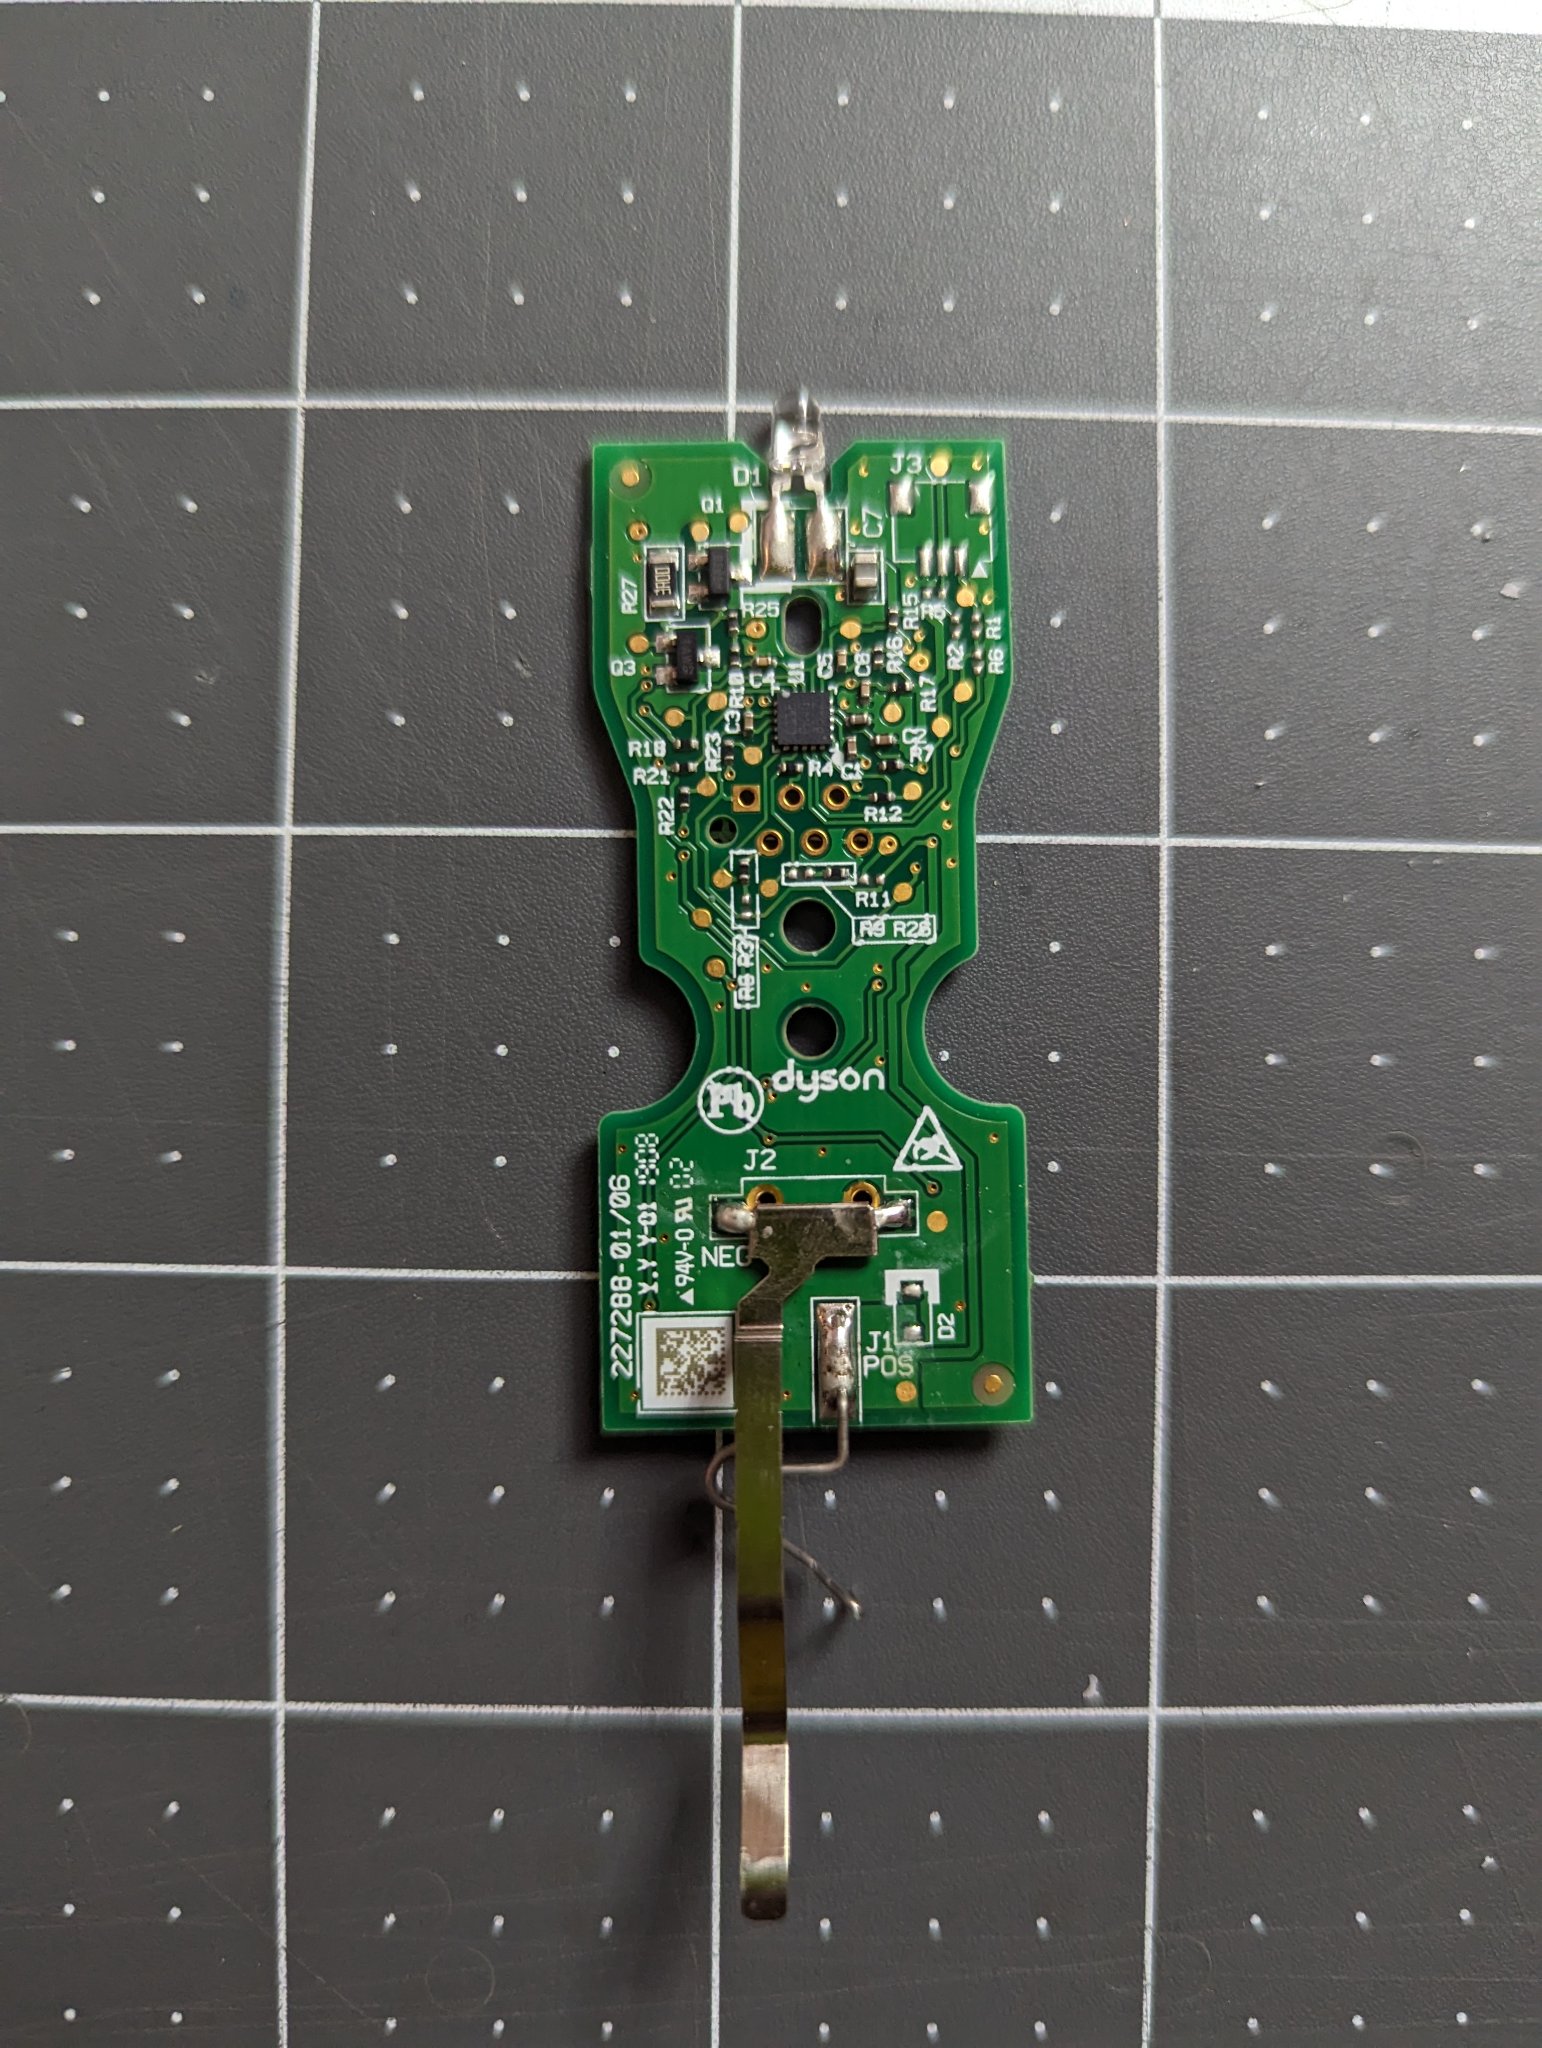 The back of the remote PCB